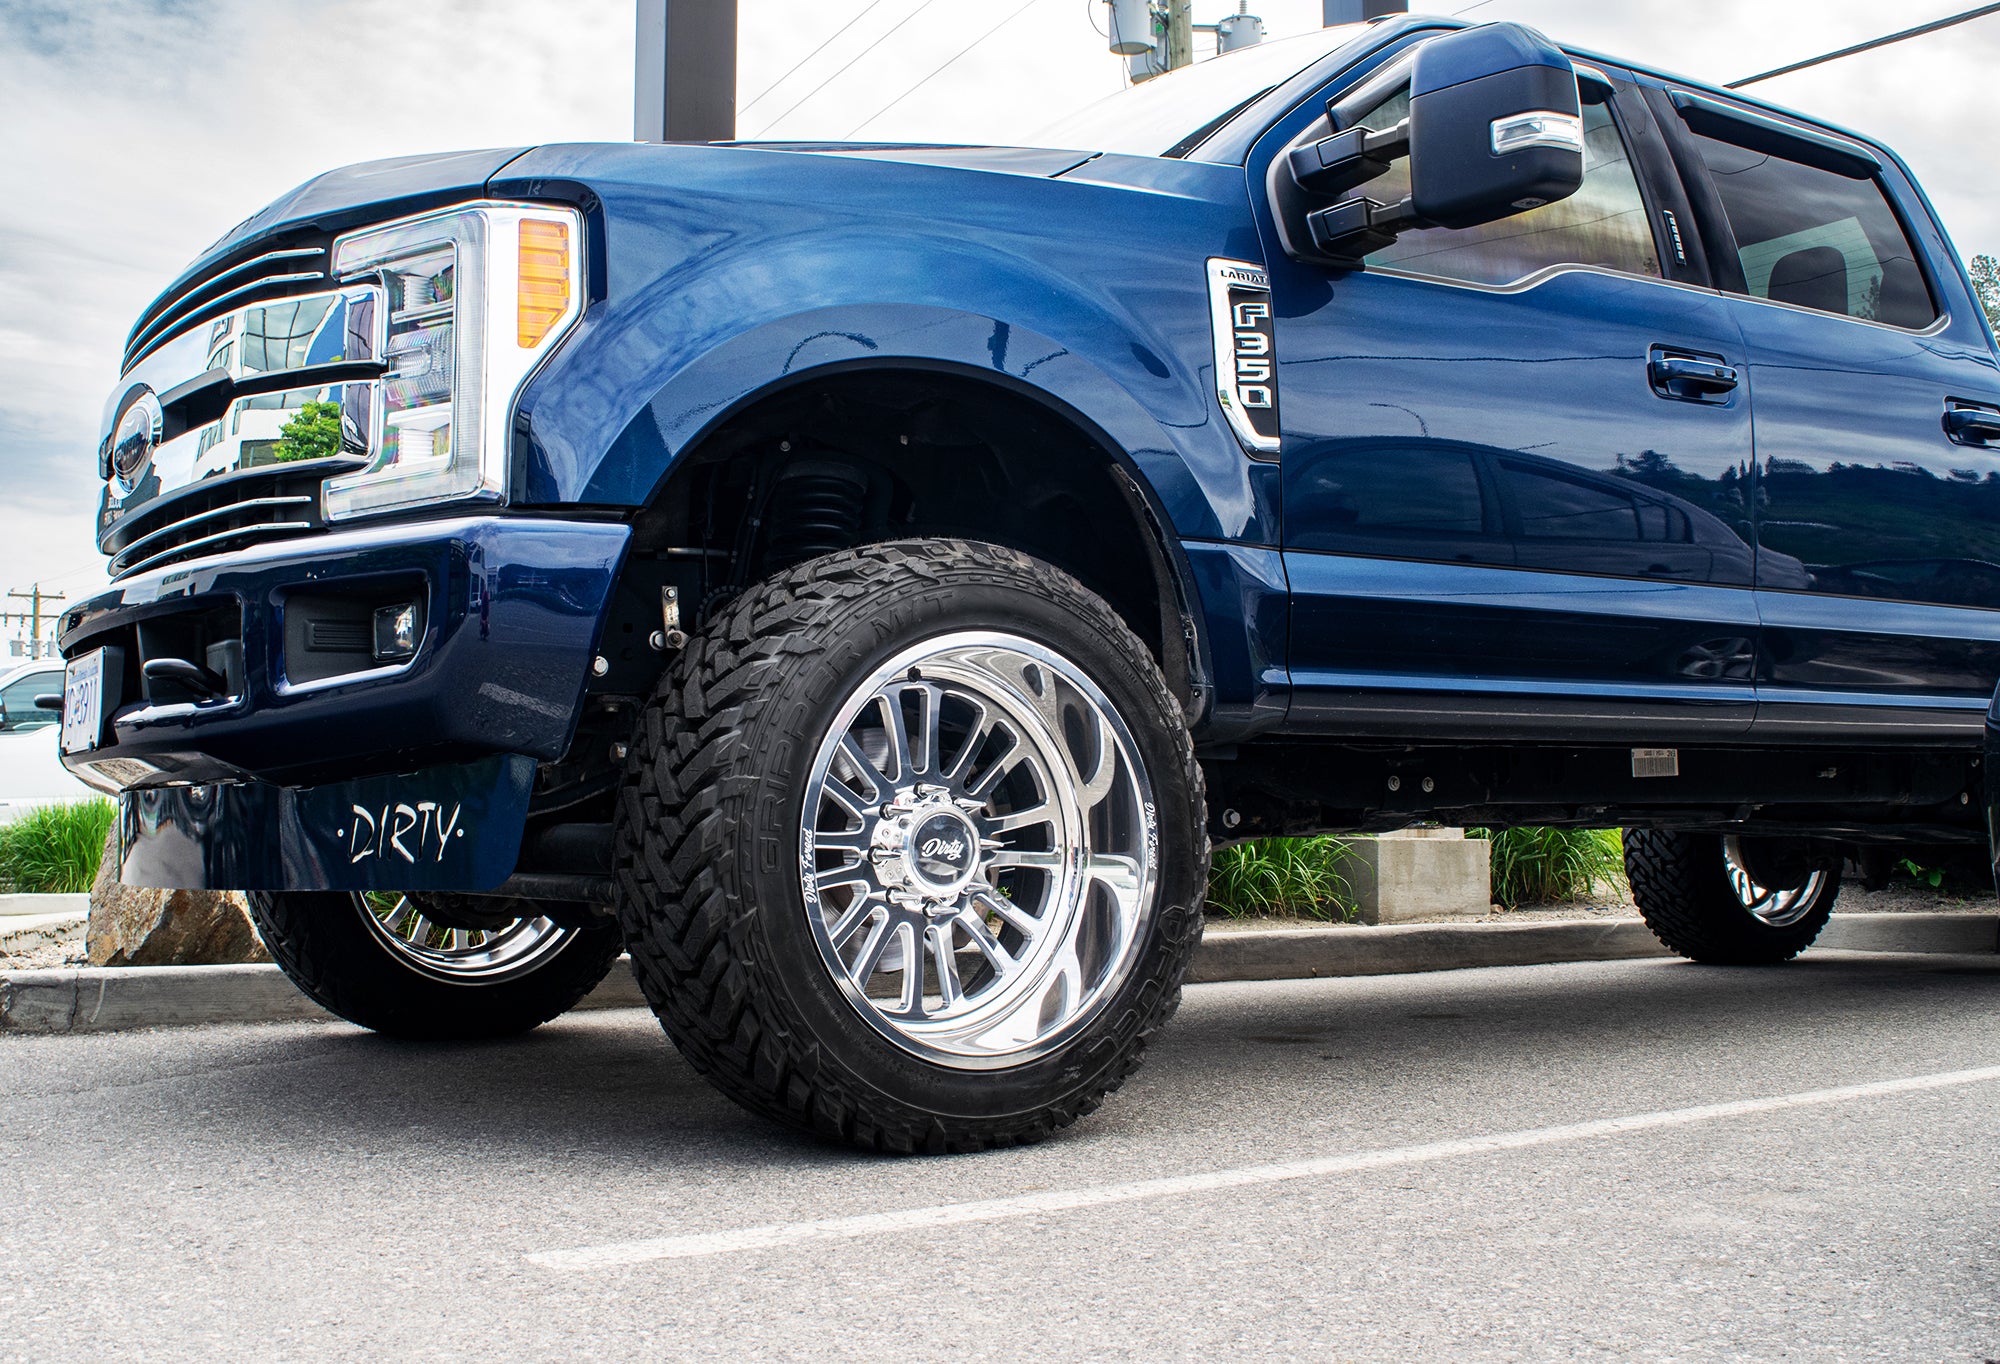 Picture of a good looking Ford F350 with Dirty Forged Wheels Mounted